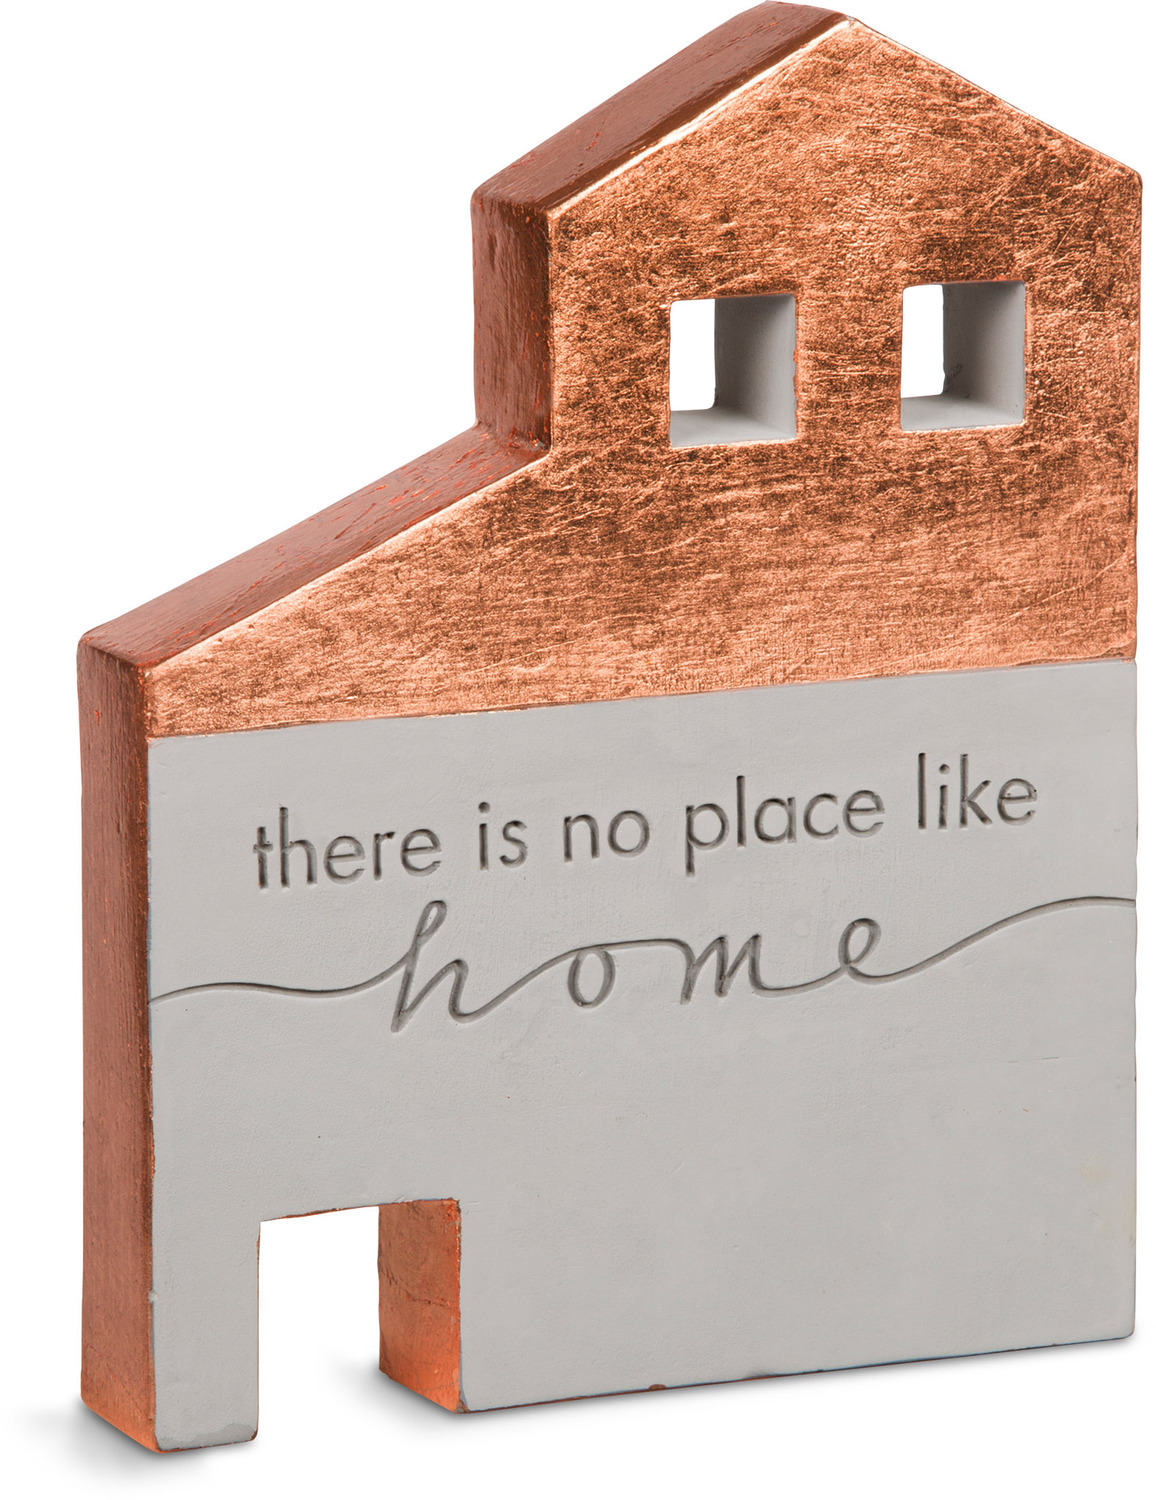 No Place Like Home by Sweet Concrete - No Place Like Home - 6" x 1" x 7.5" Cement House